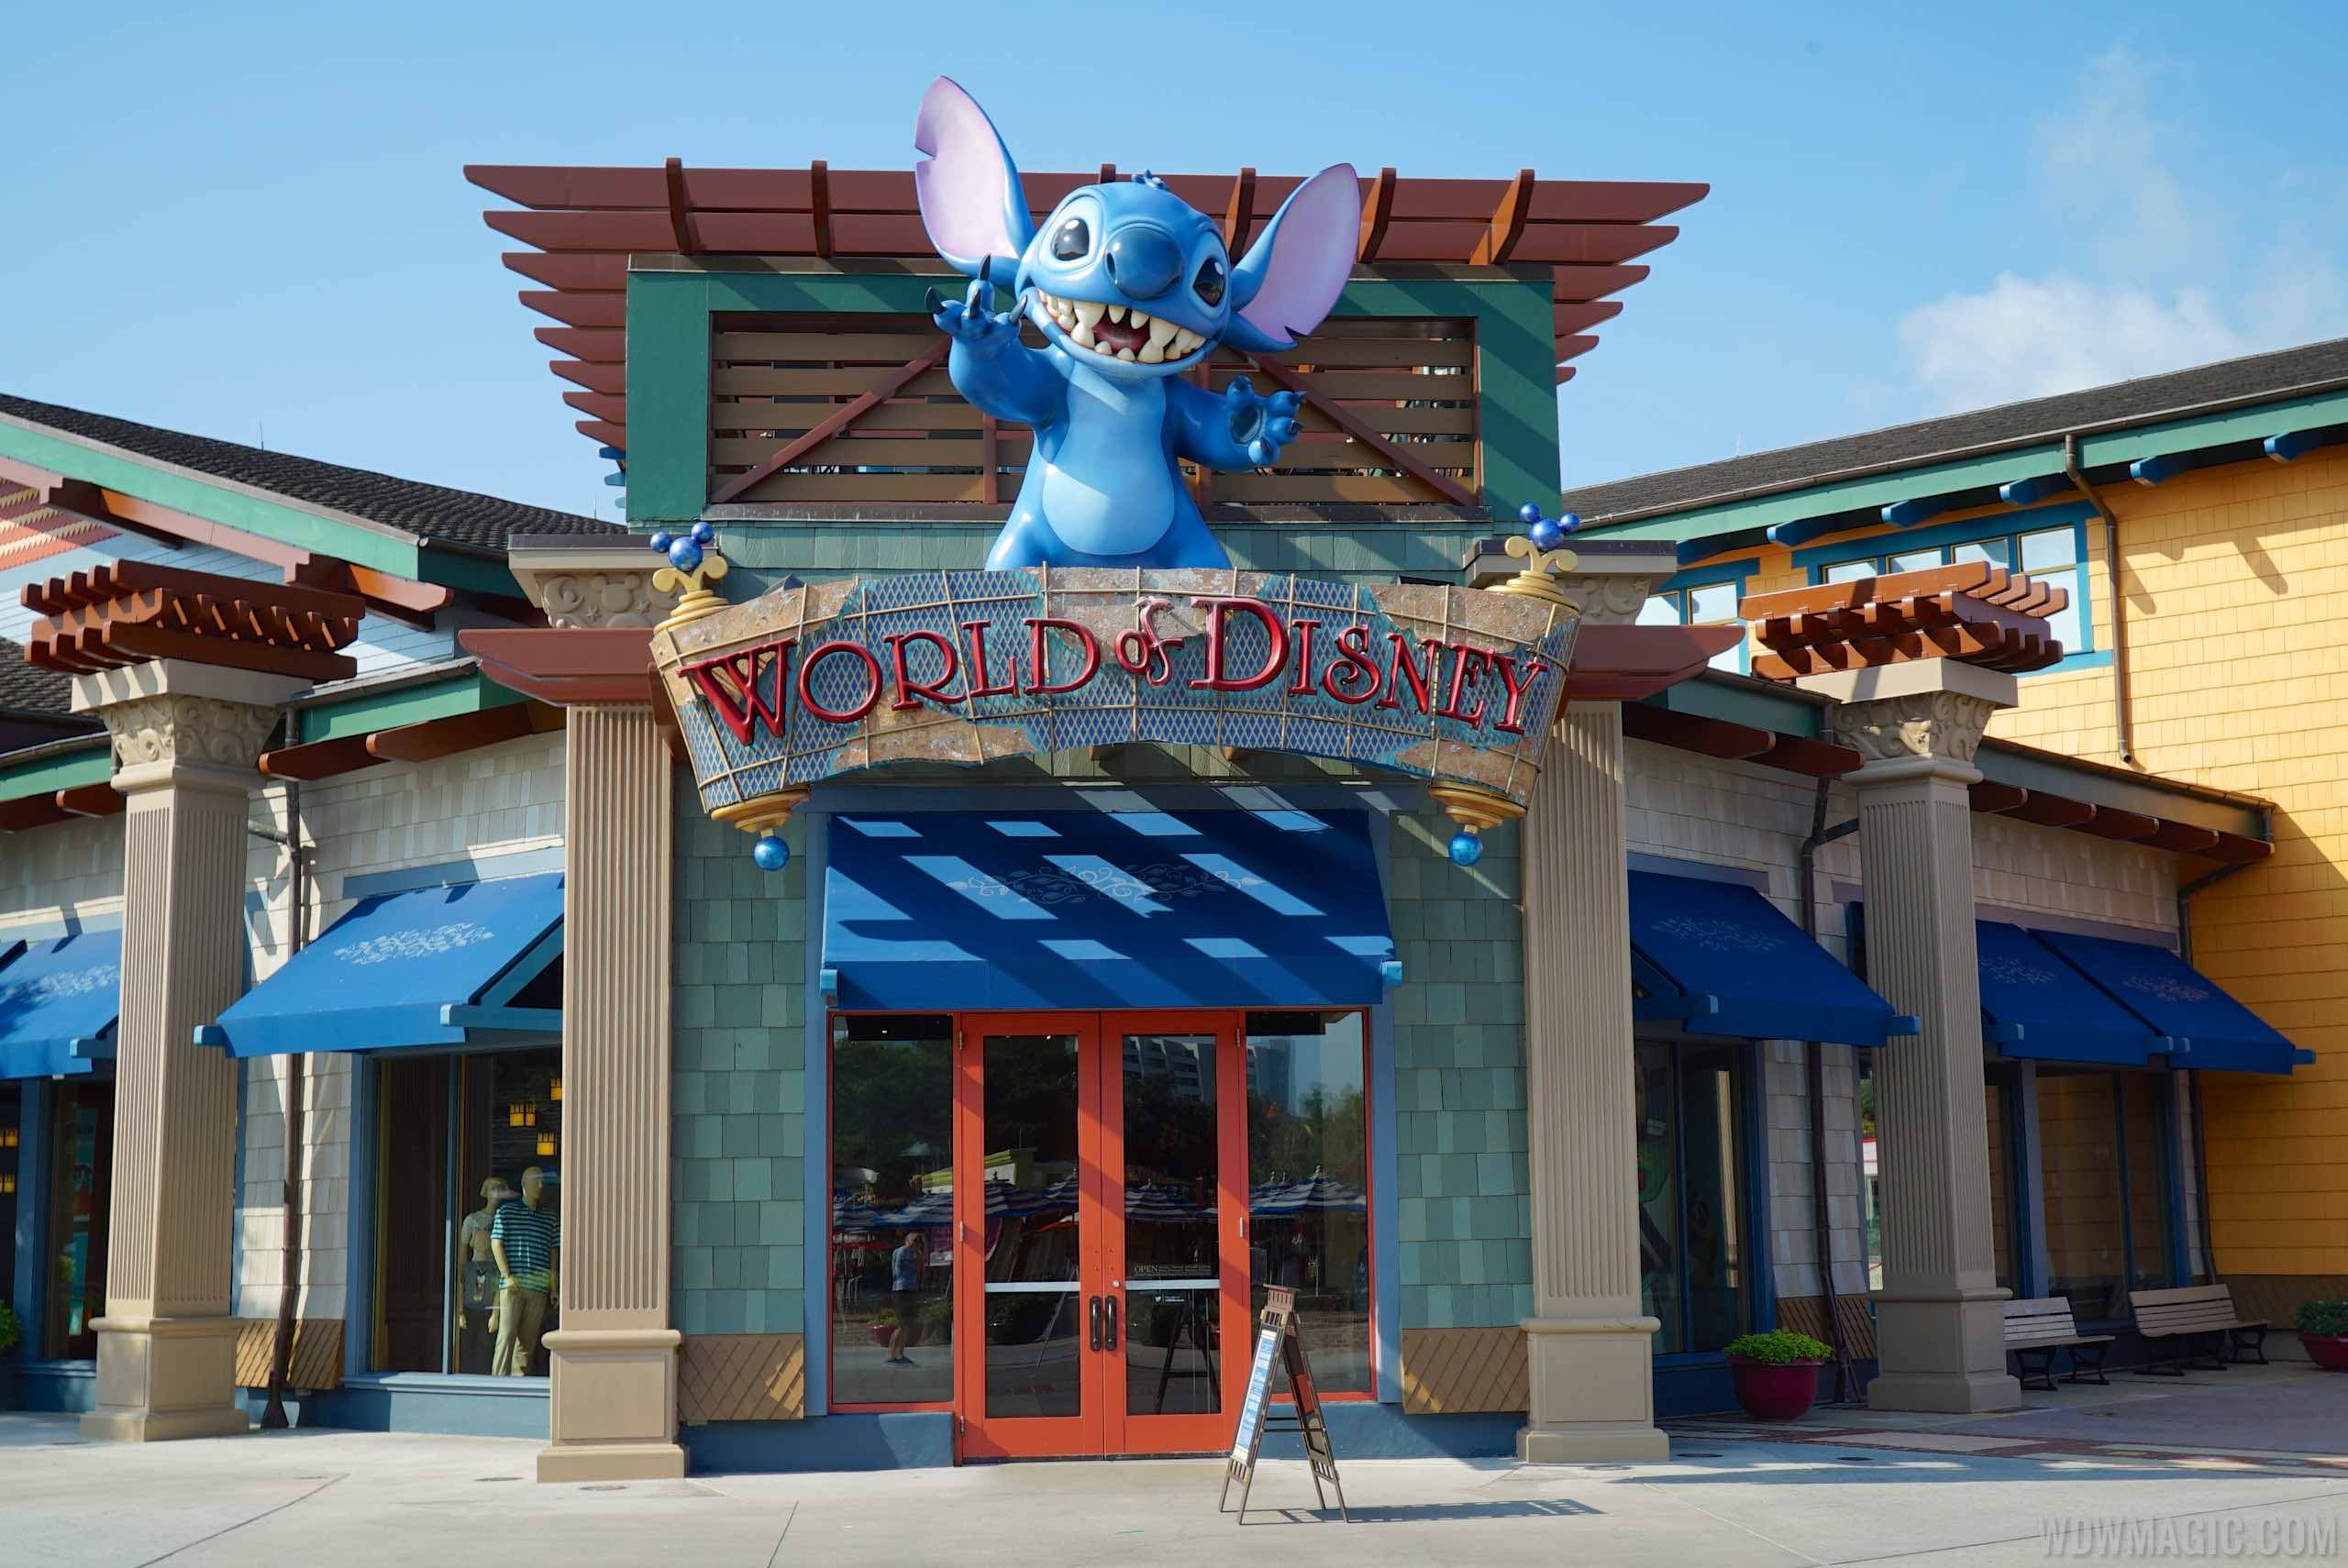 PHOTOS - New look color scheme for World of Disney at Disney Springs